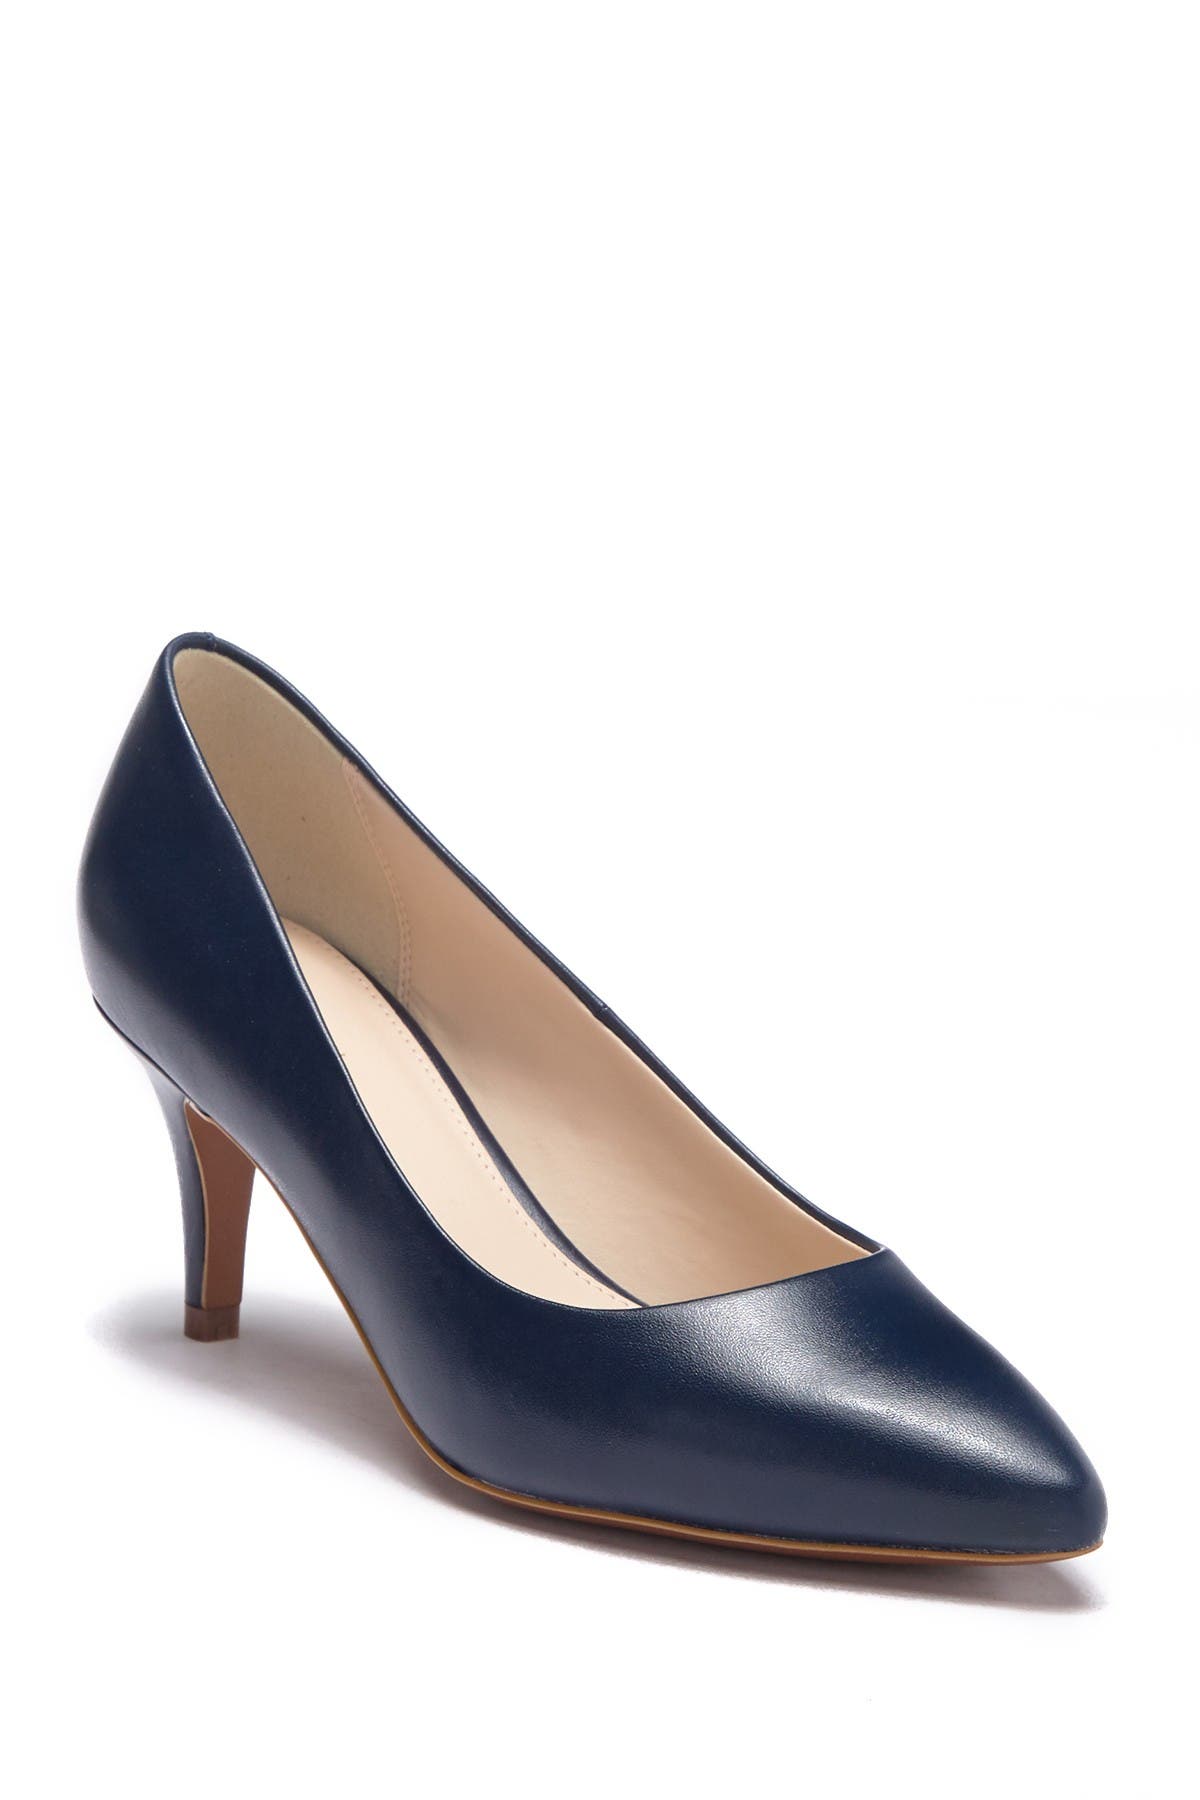 Cole Haan | Harlow Leather Pump 